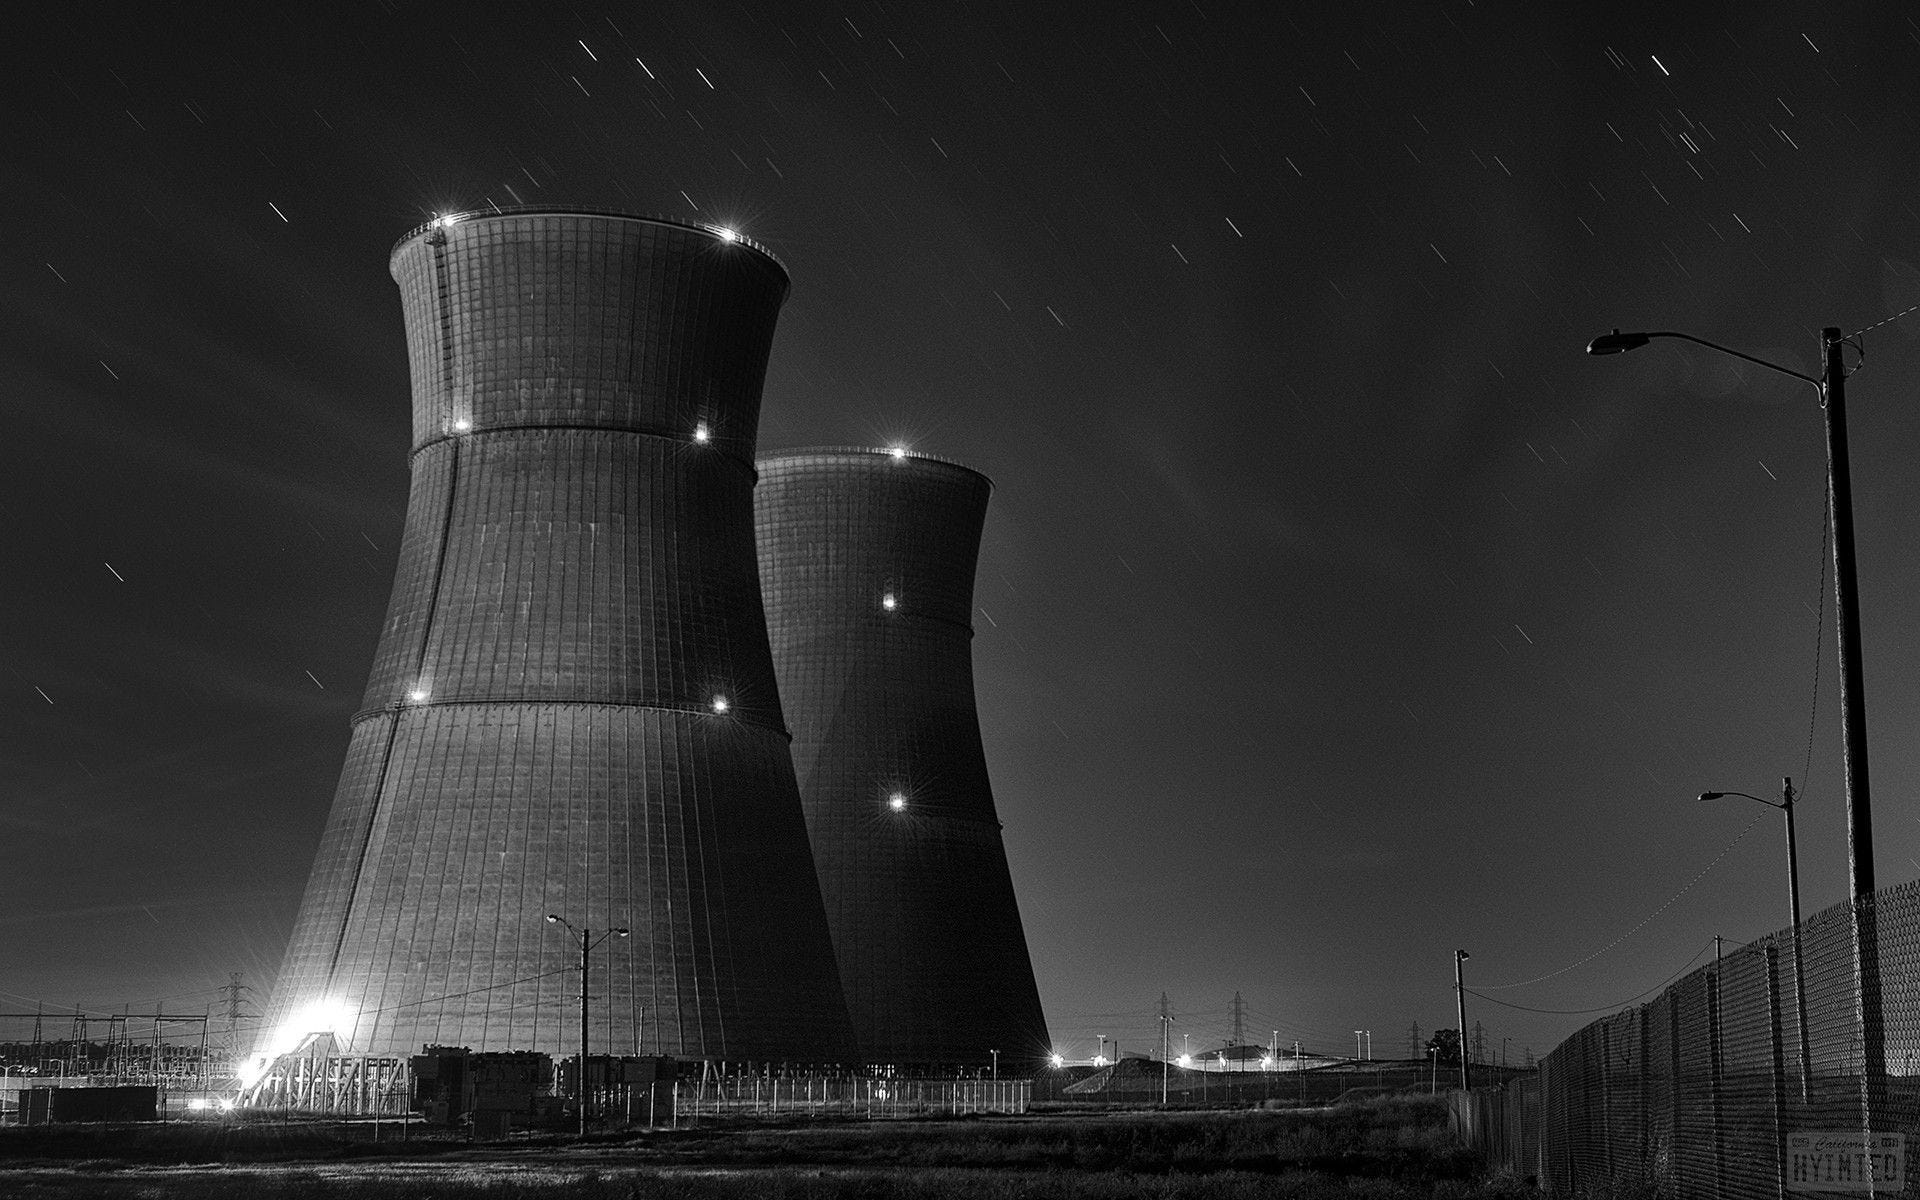 UFO Sightings Surge at Nuclear Power Plant in India